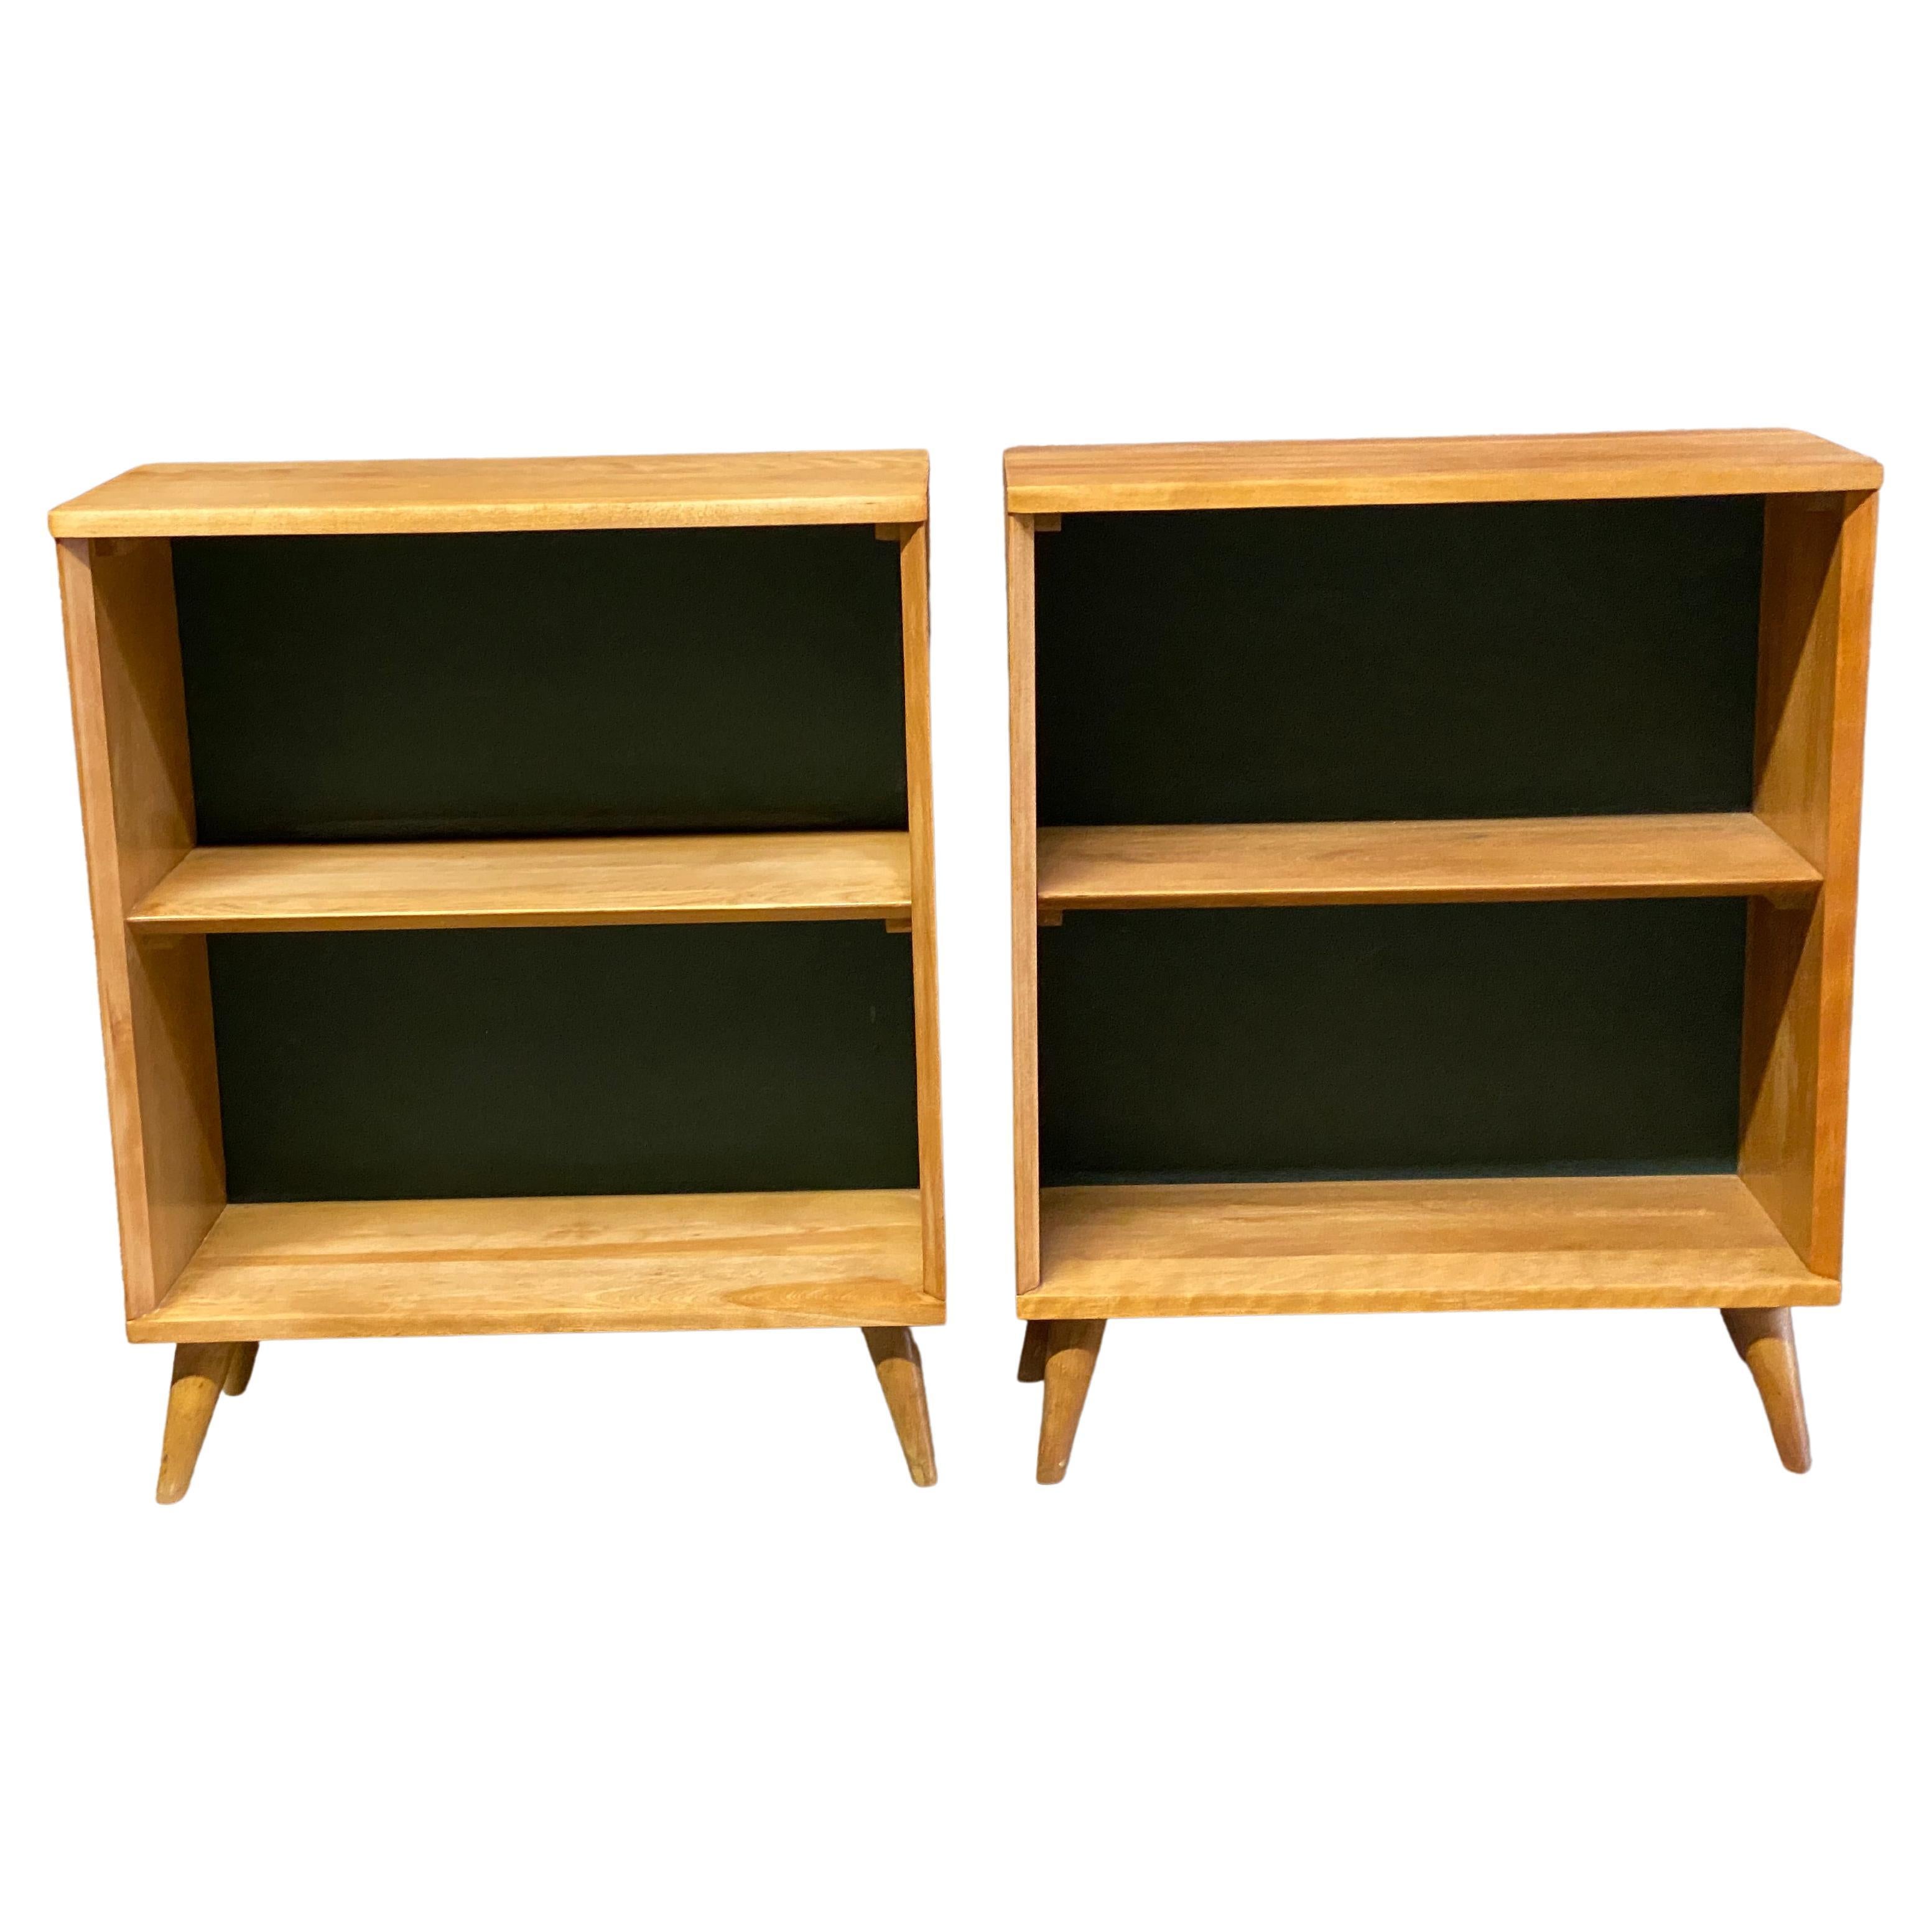 Mid-Century Modern Maple and Masonite Bookcases, a Pair